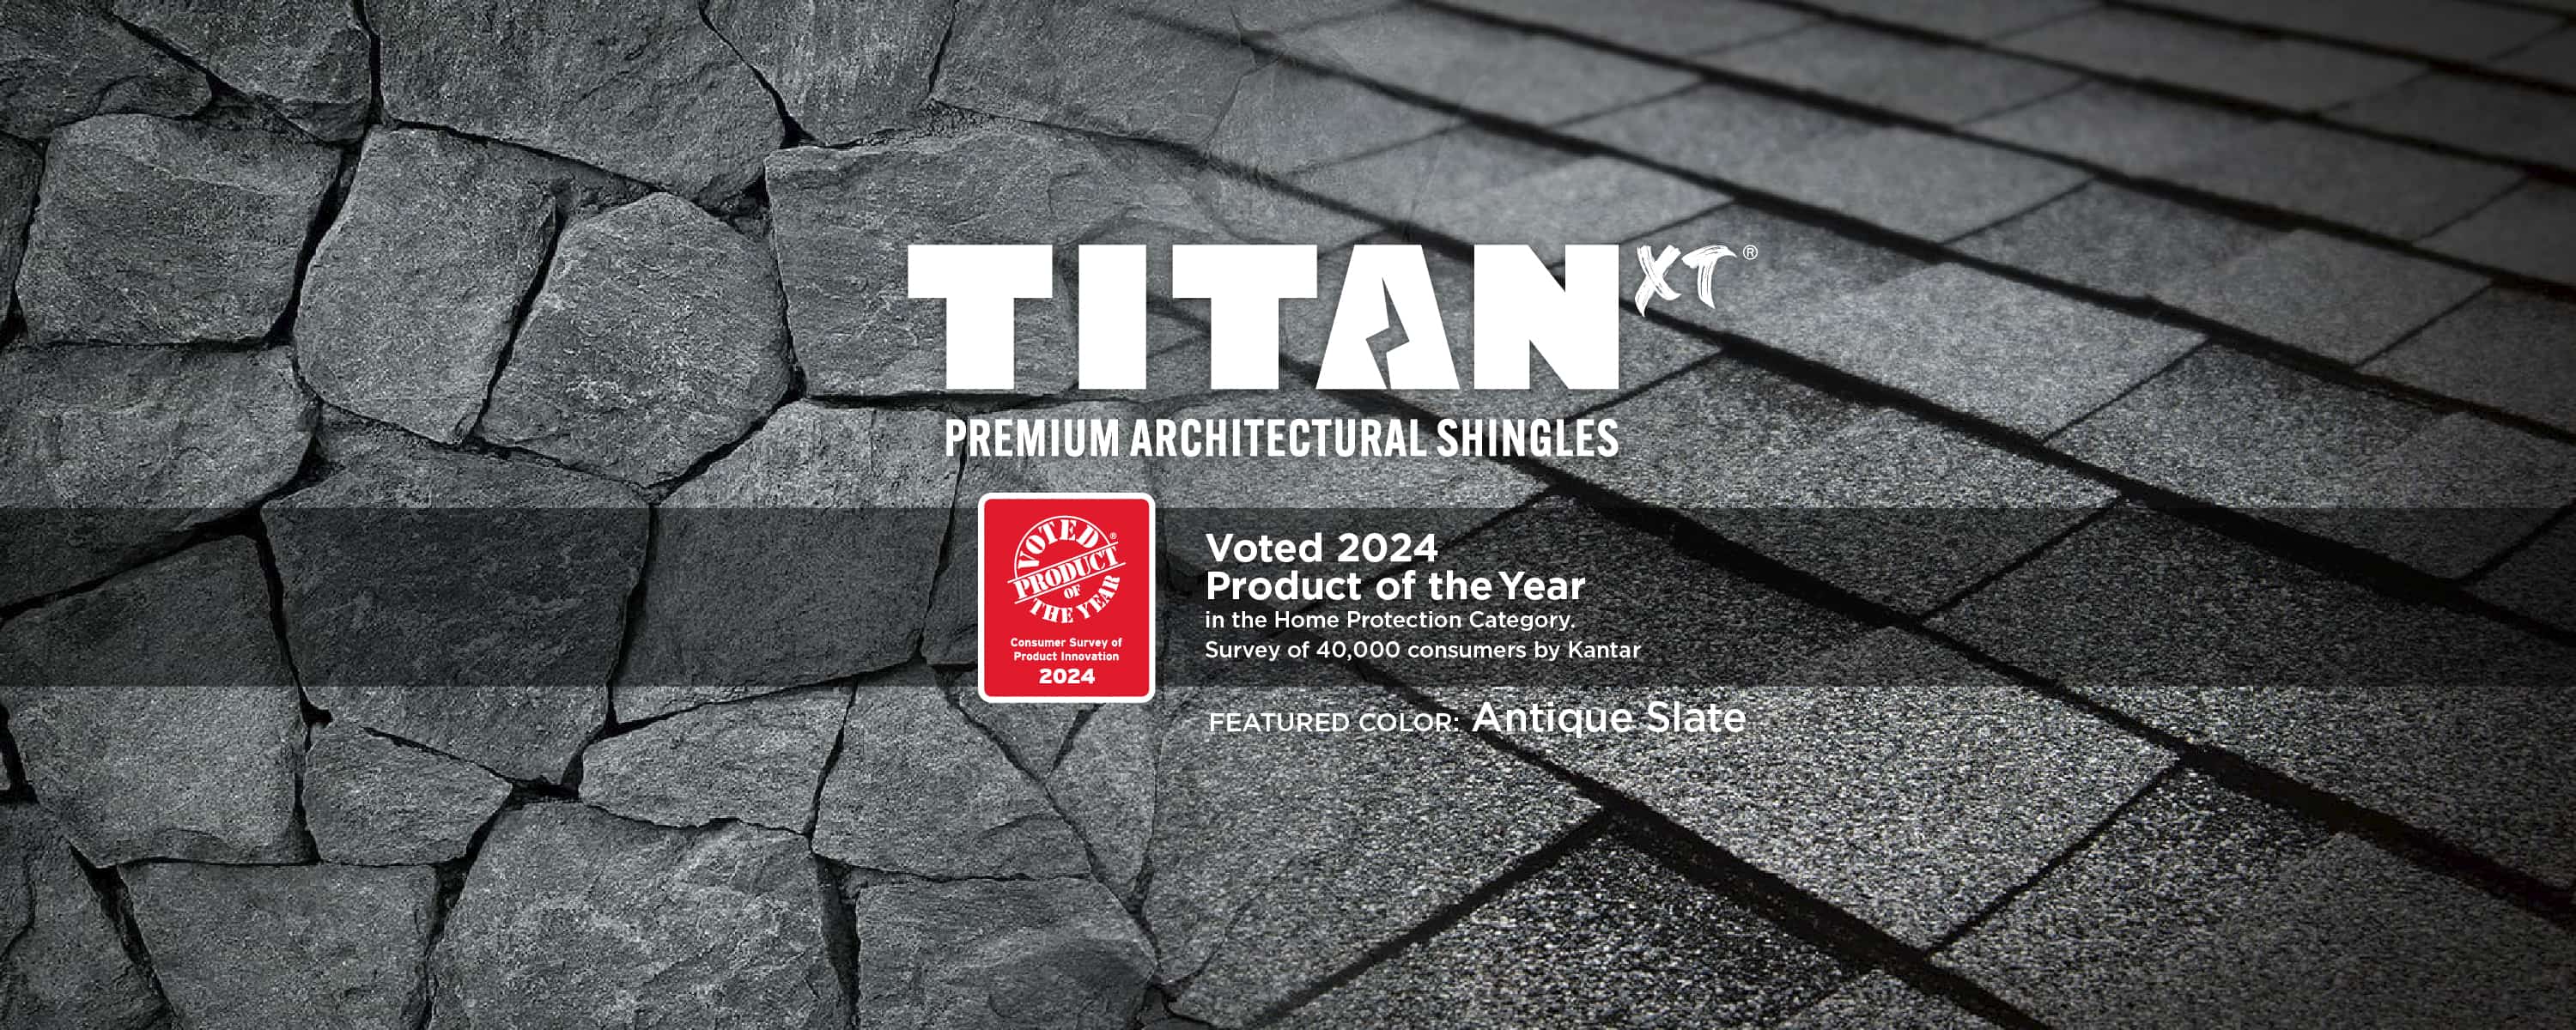 Titan XT 2024 Product of the Year - Antique Slate